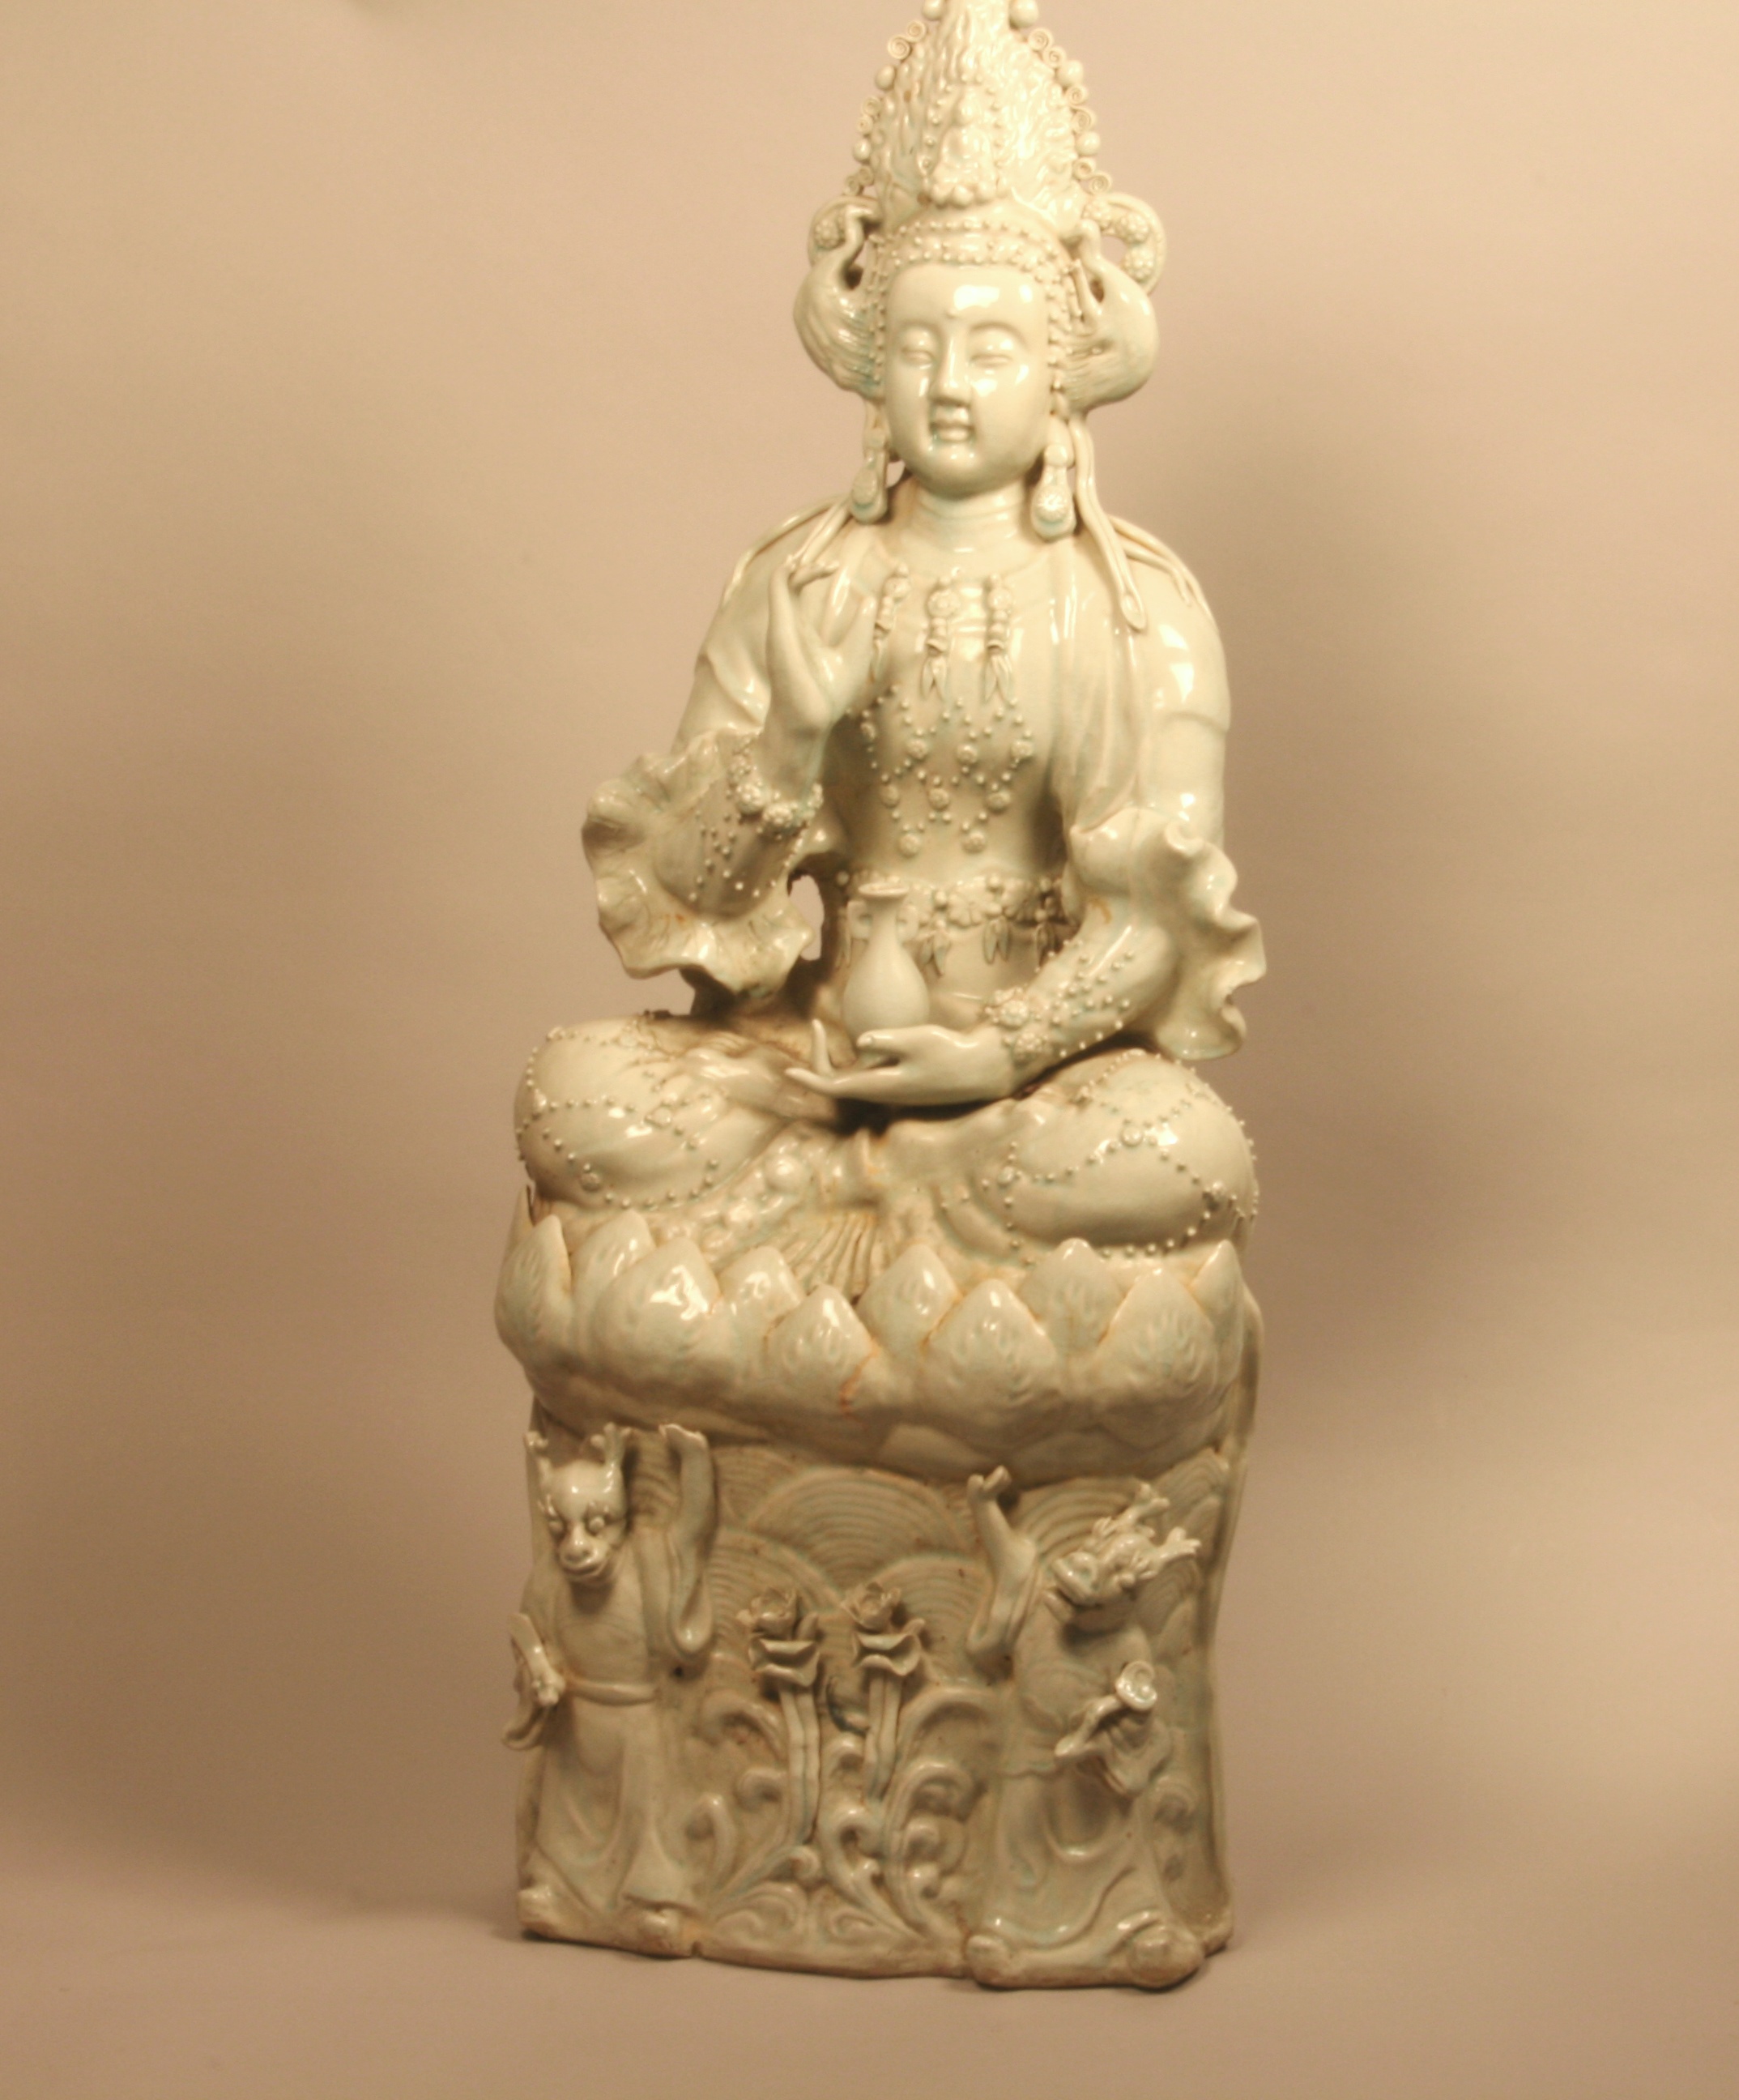 A Large Chinese Pale Celadon Porcelain Statue of Guanyin. Late19th/early 20th century. Shown